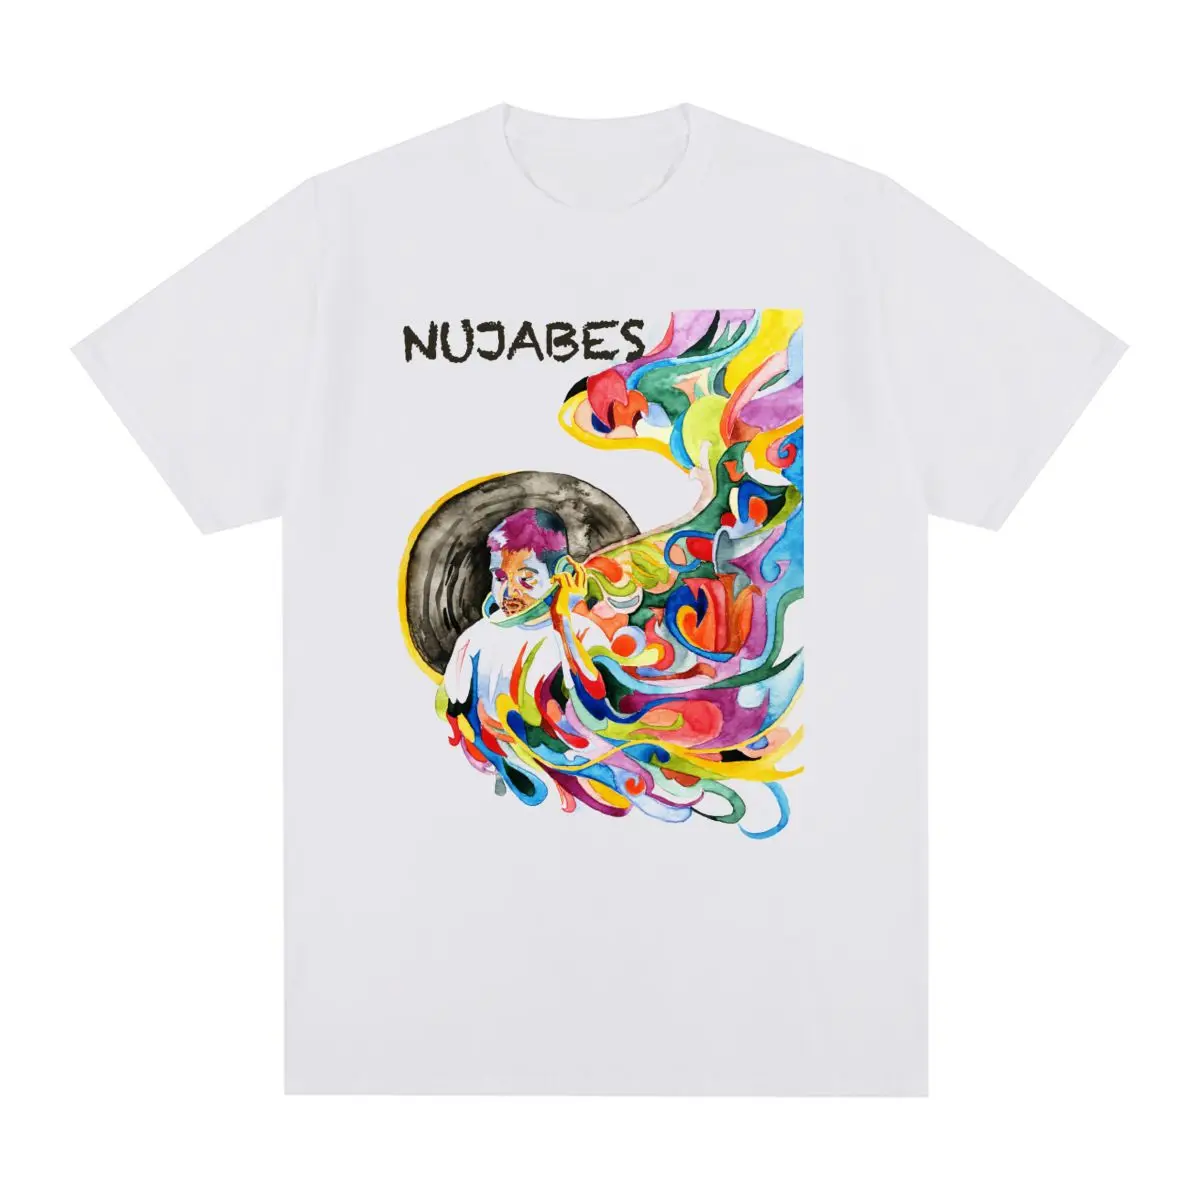 

Nujabes Vintage Hip Hop T-shirt Producer Underground Metaphorical Music Cotton Men T shirt New Tee Tshirt Womens Tops